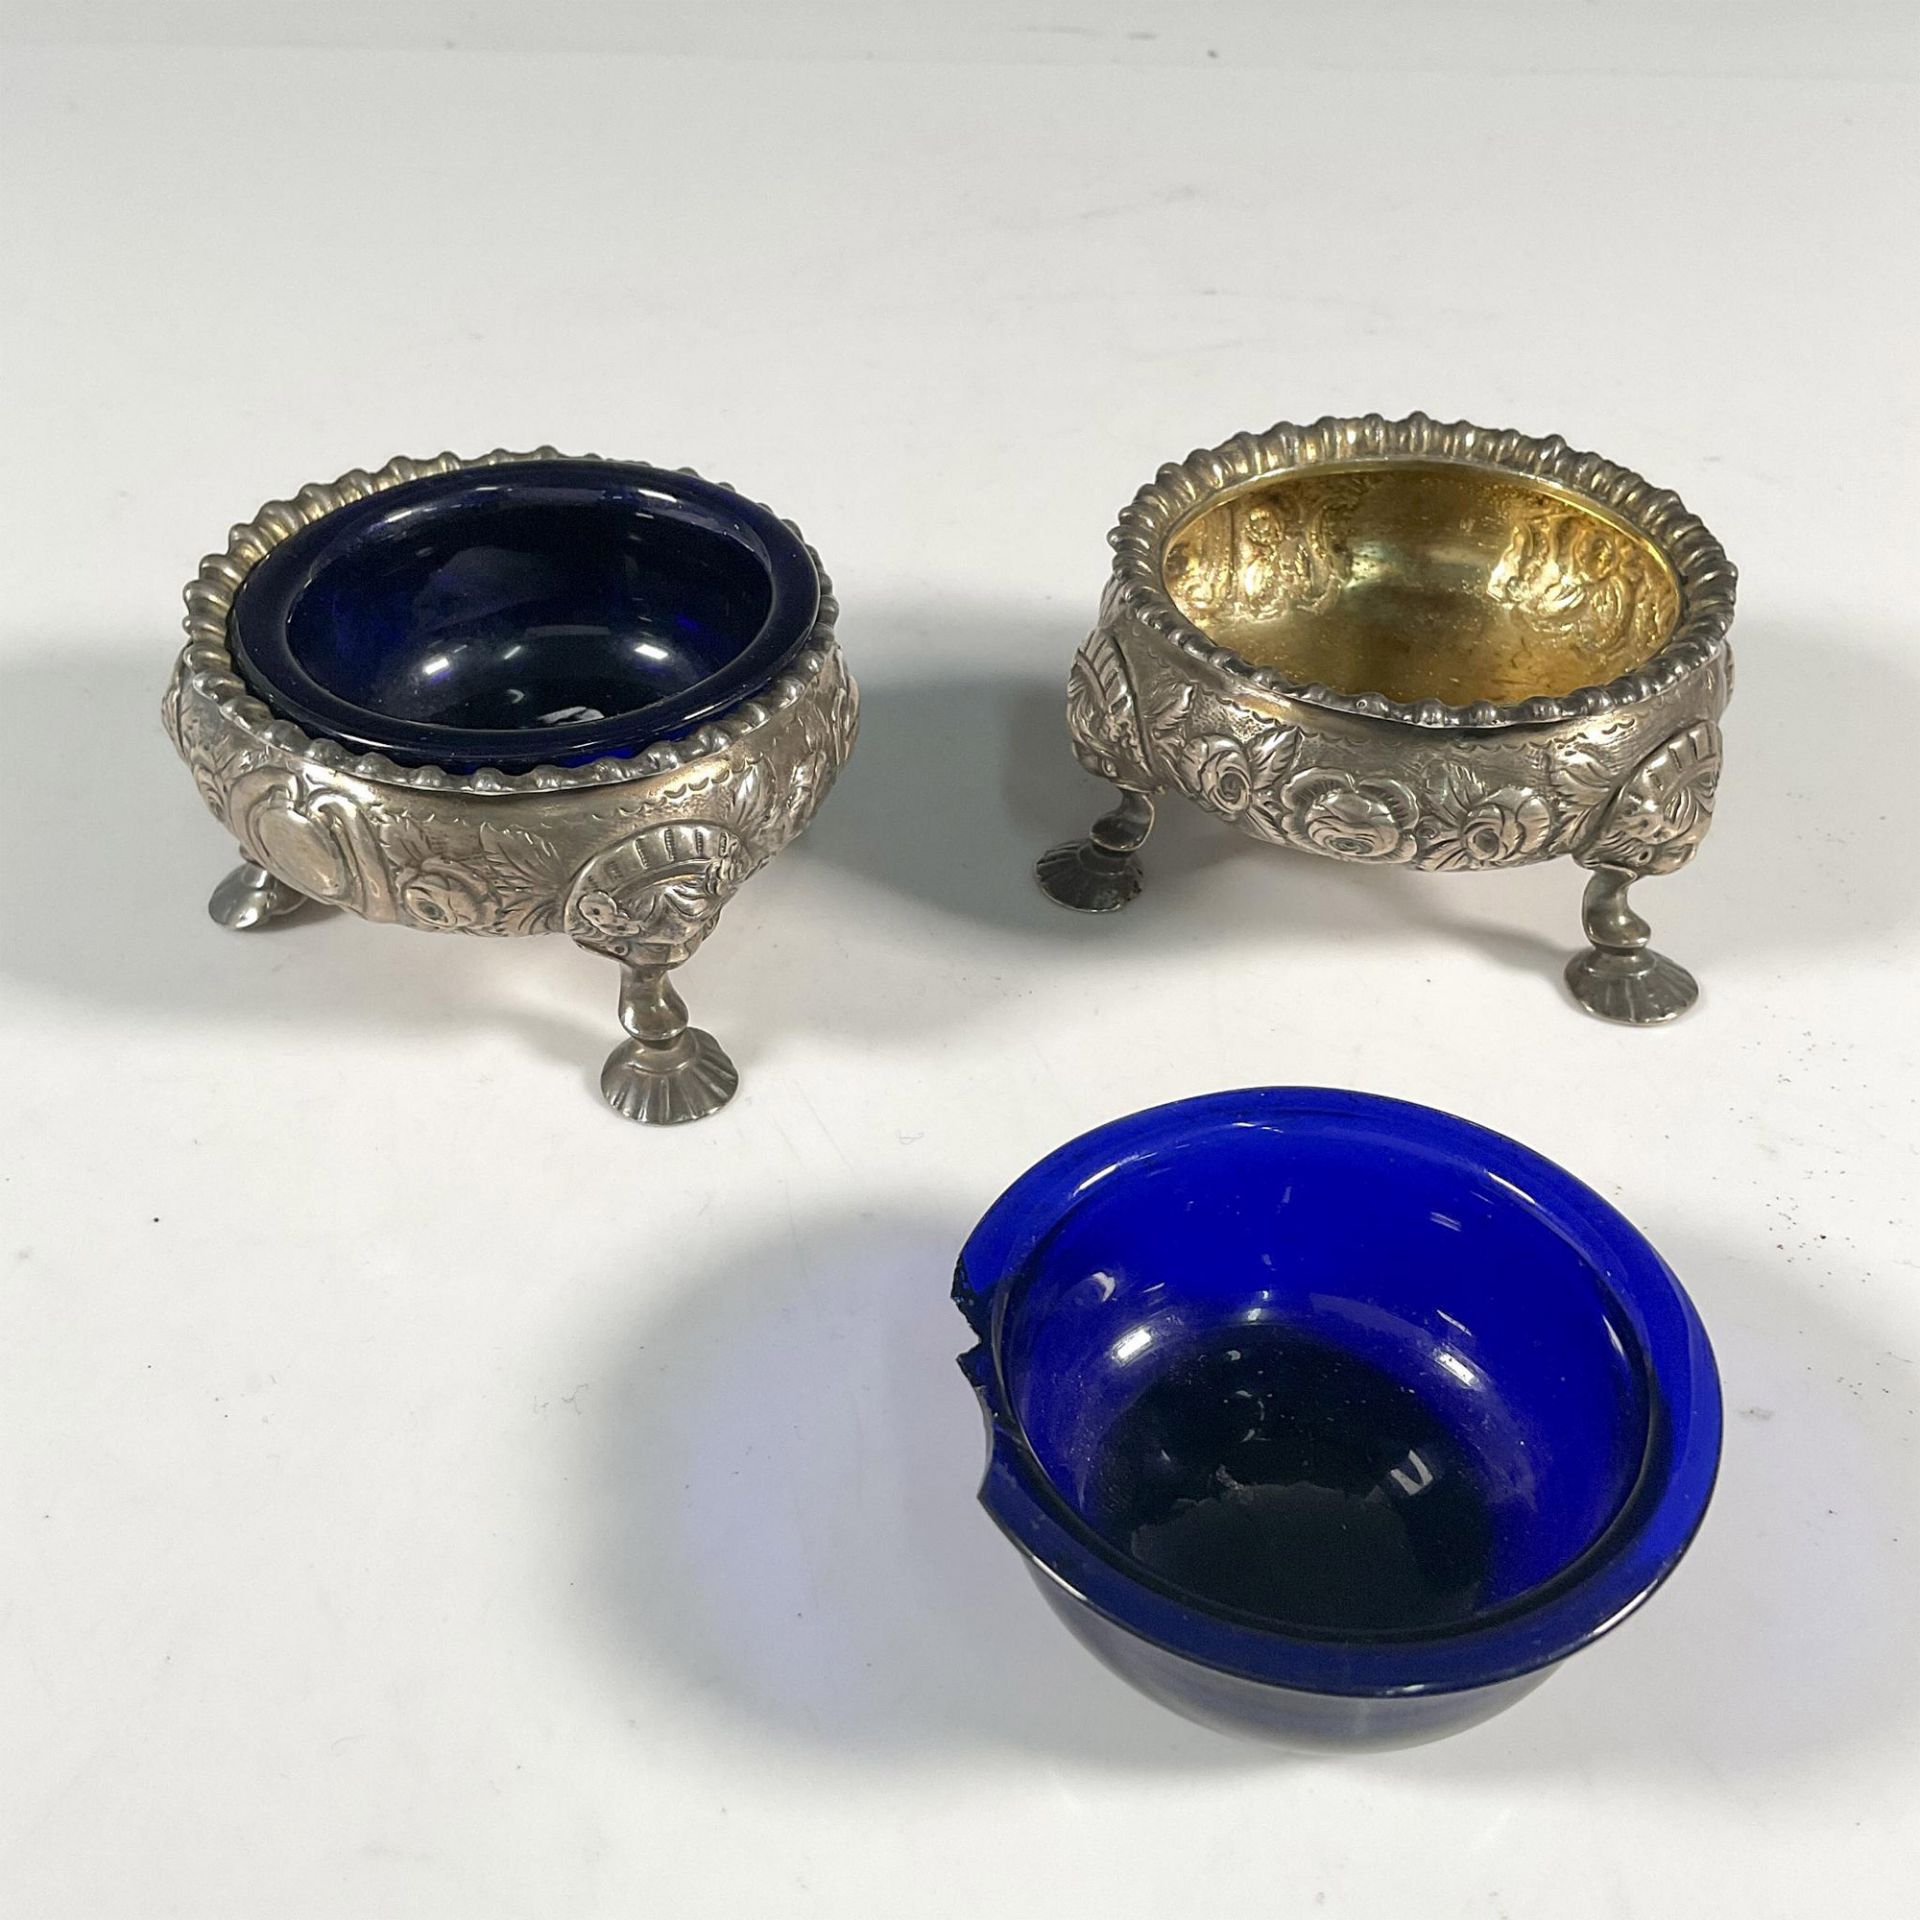 Pair of 19th Century English Silver and Glass Salt Cellars - Image 2 of 3